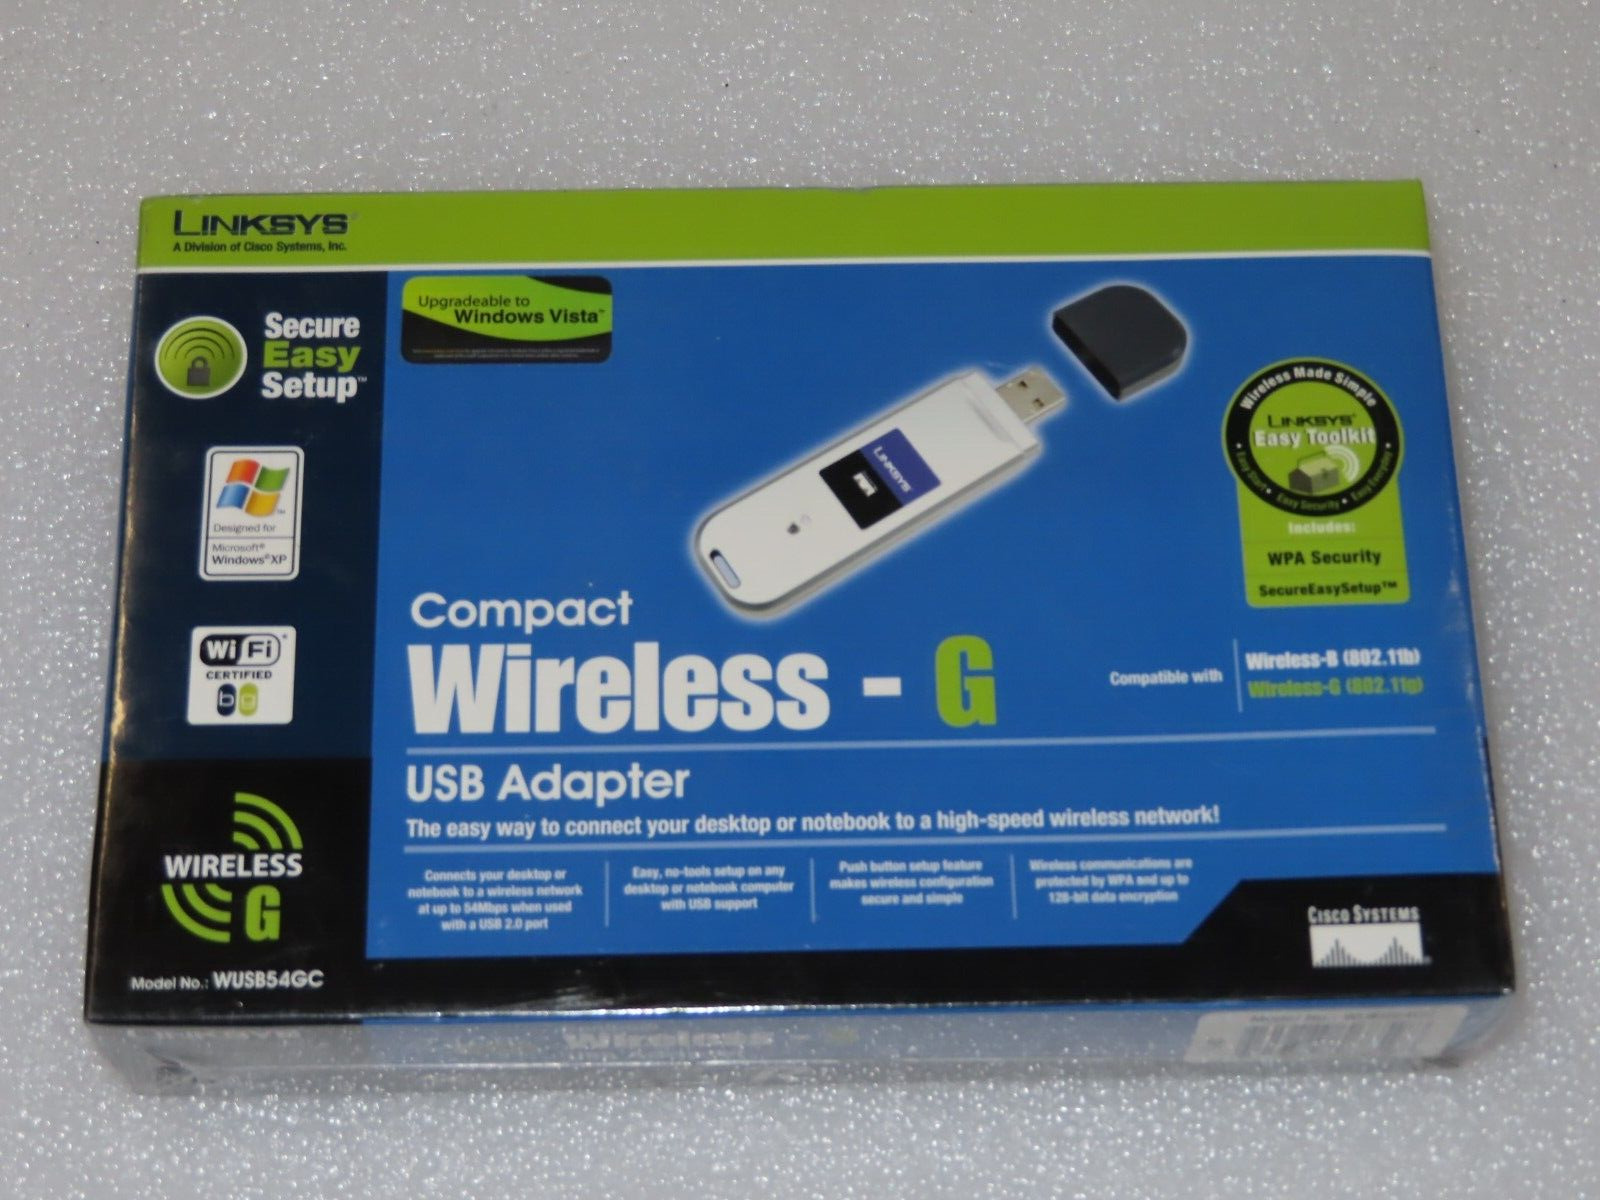 NEW Linksys/Cisco Systems WUSB54GC Compact Wireless-G USB Adapter G2